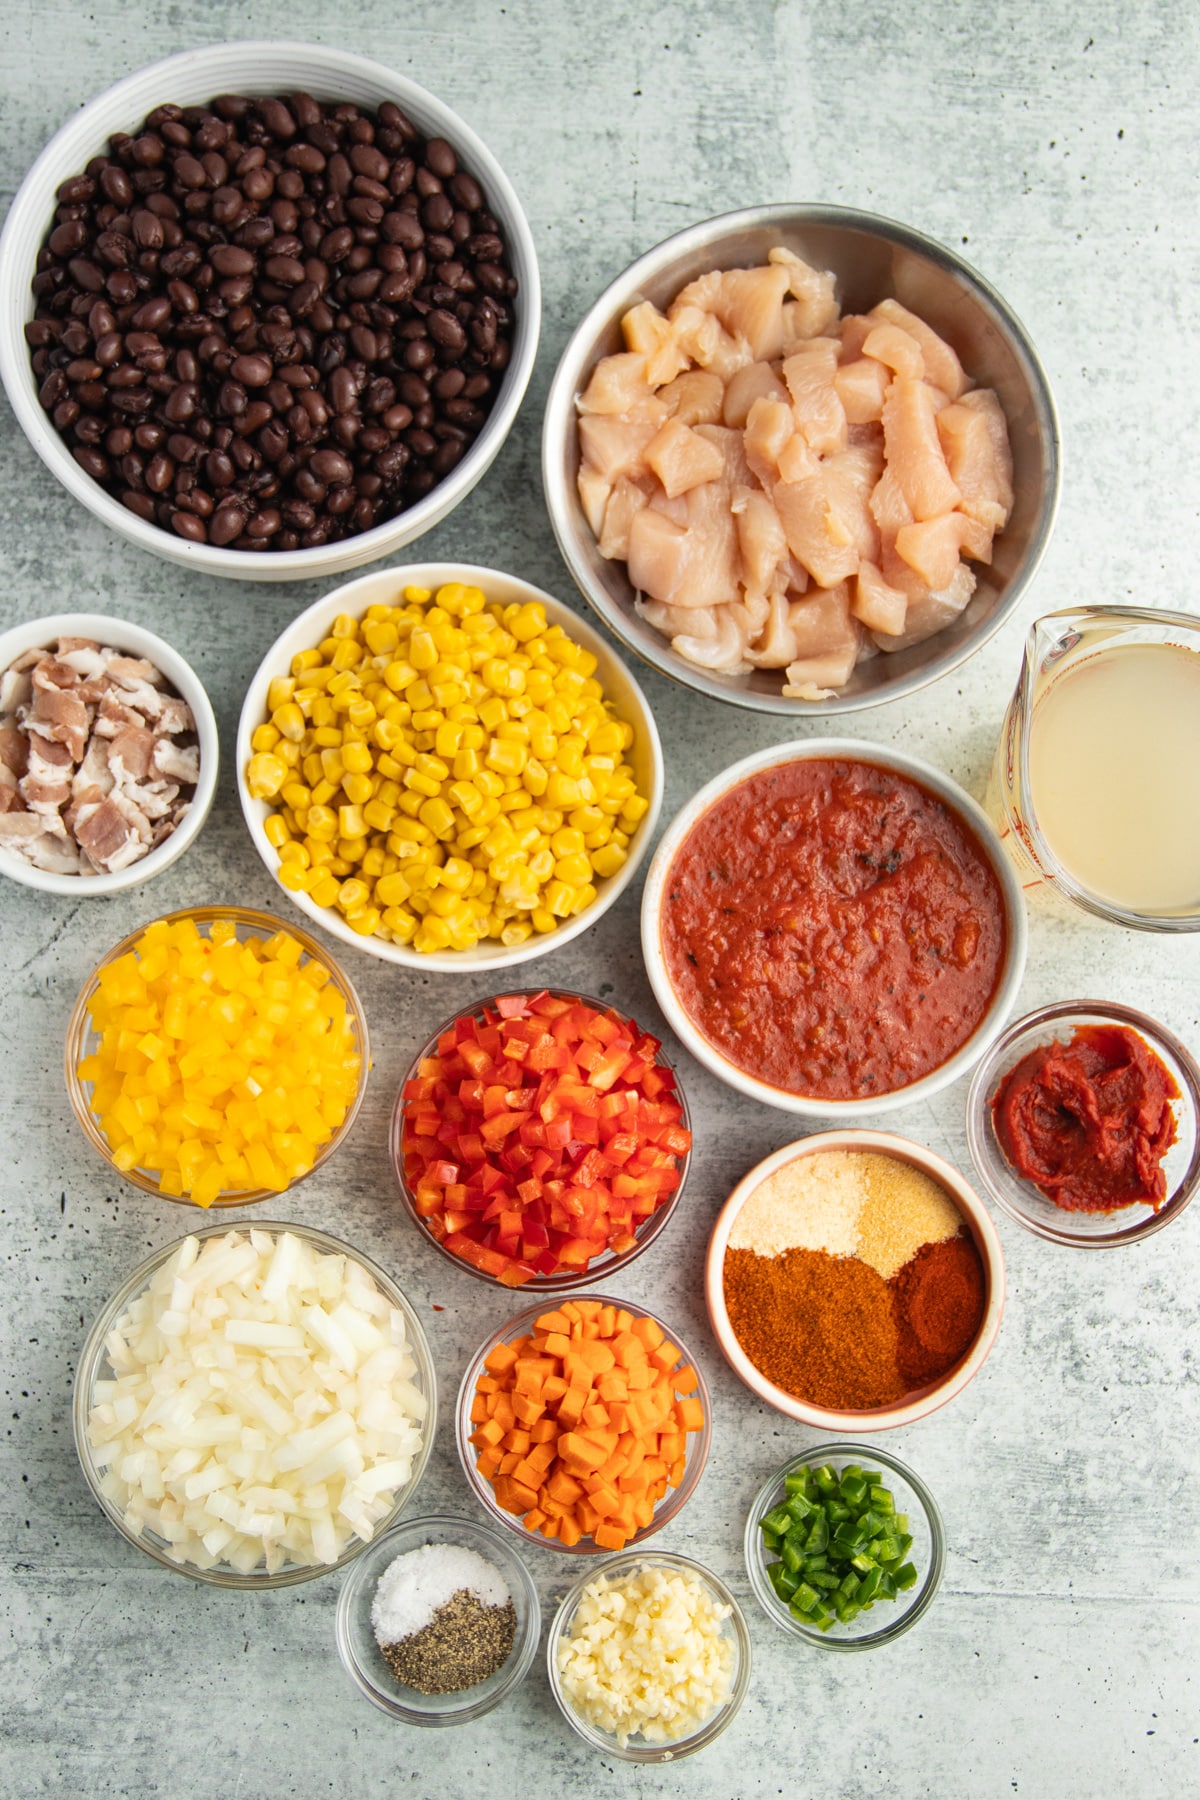 This is a picture of all the ingredients to make the chili.